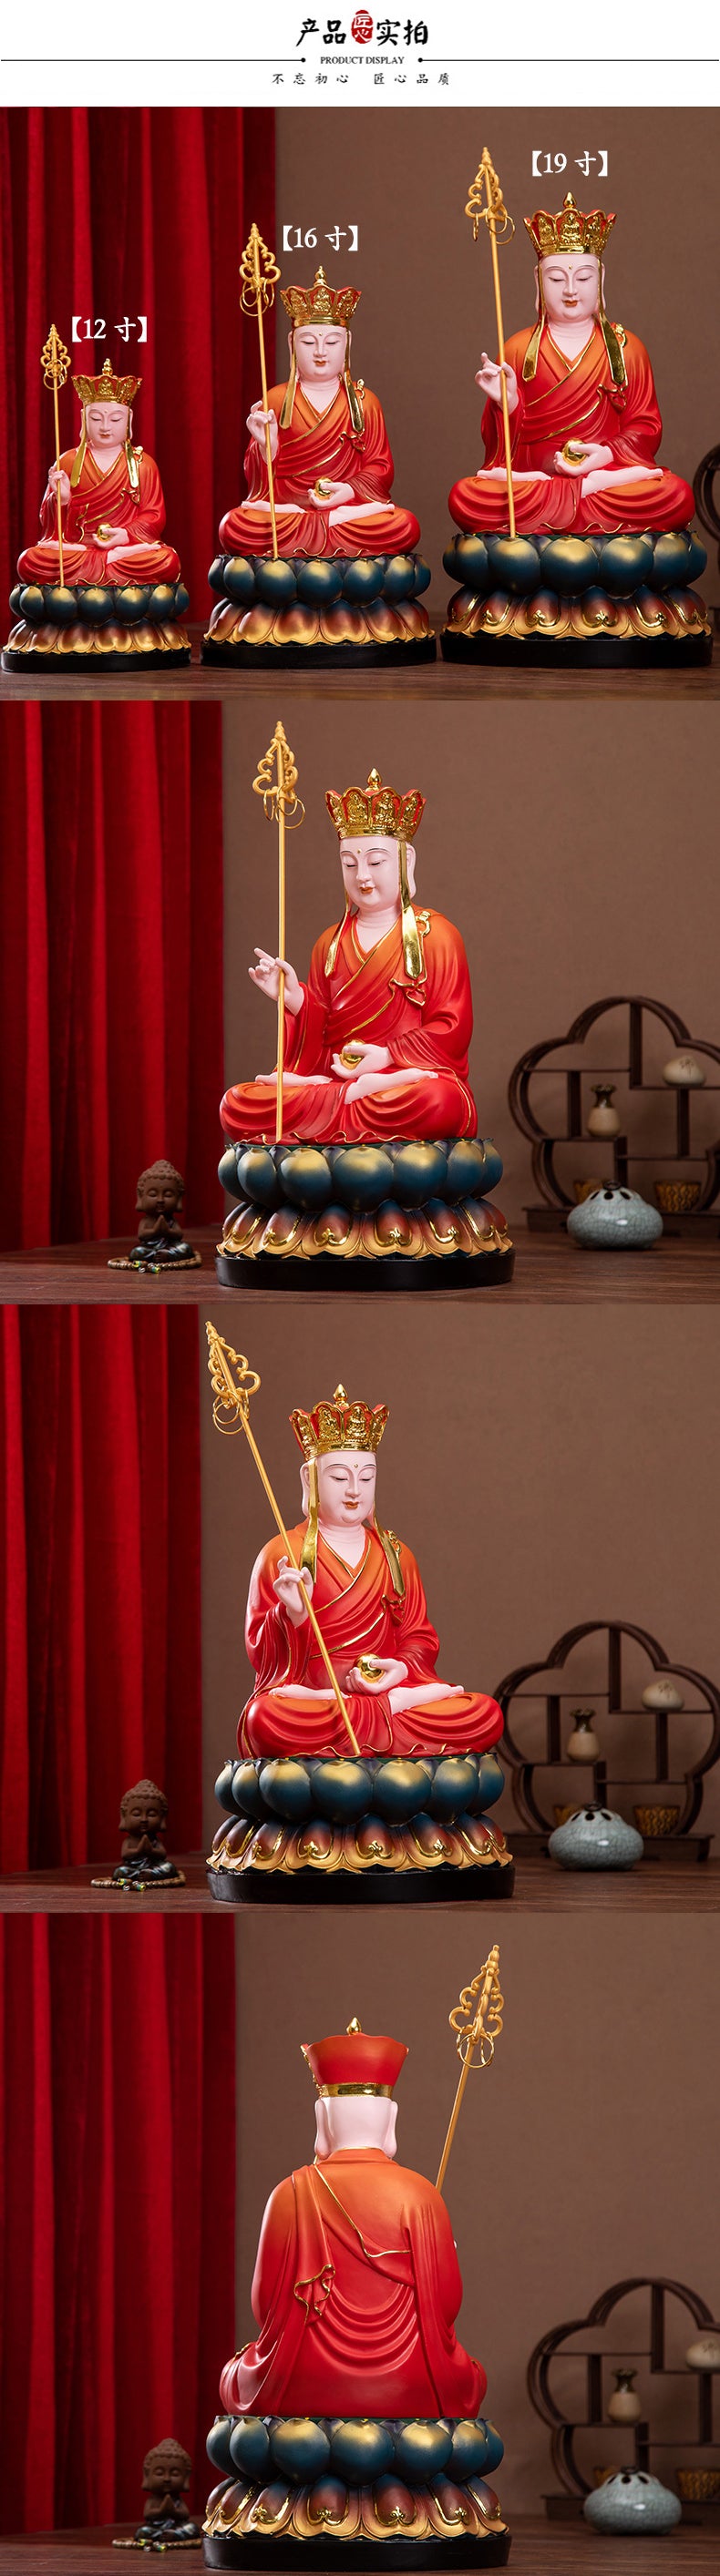 Ksitigarbha, Dizang Wang Bodhisattva Buddha Statue for Sale, Red Clothes Resin Material, Offerings Product Detail Statement-4